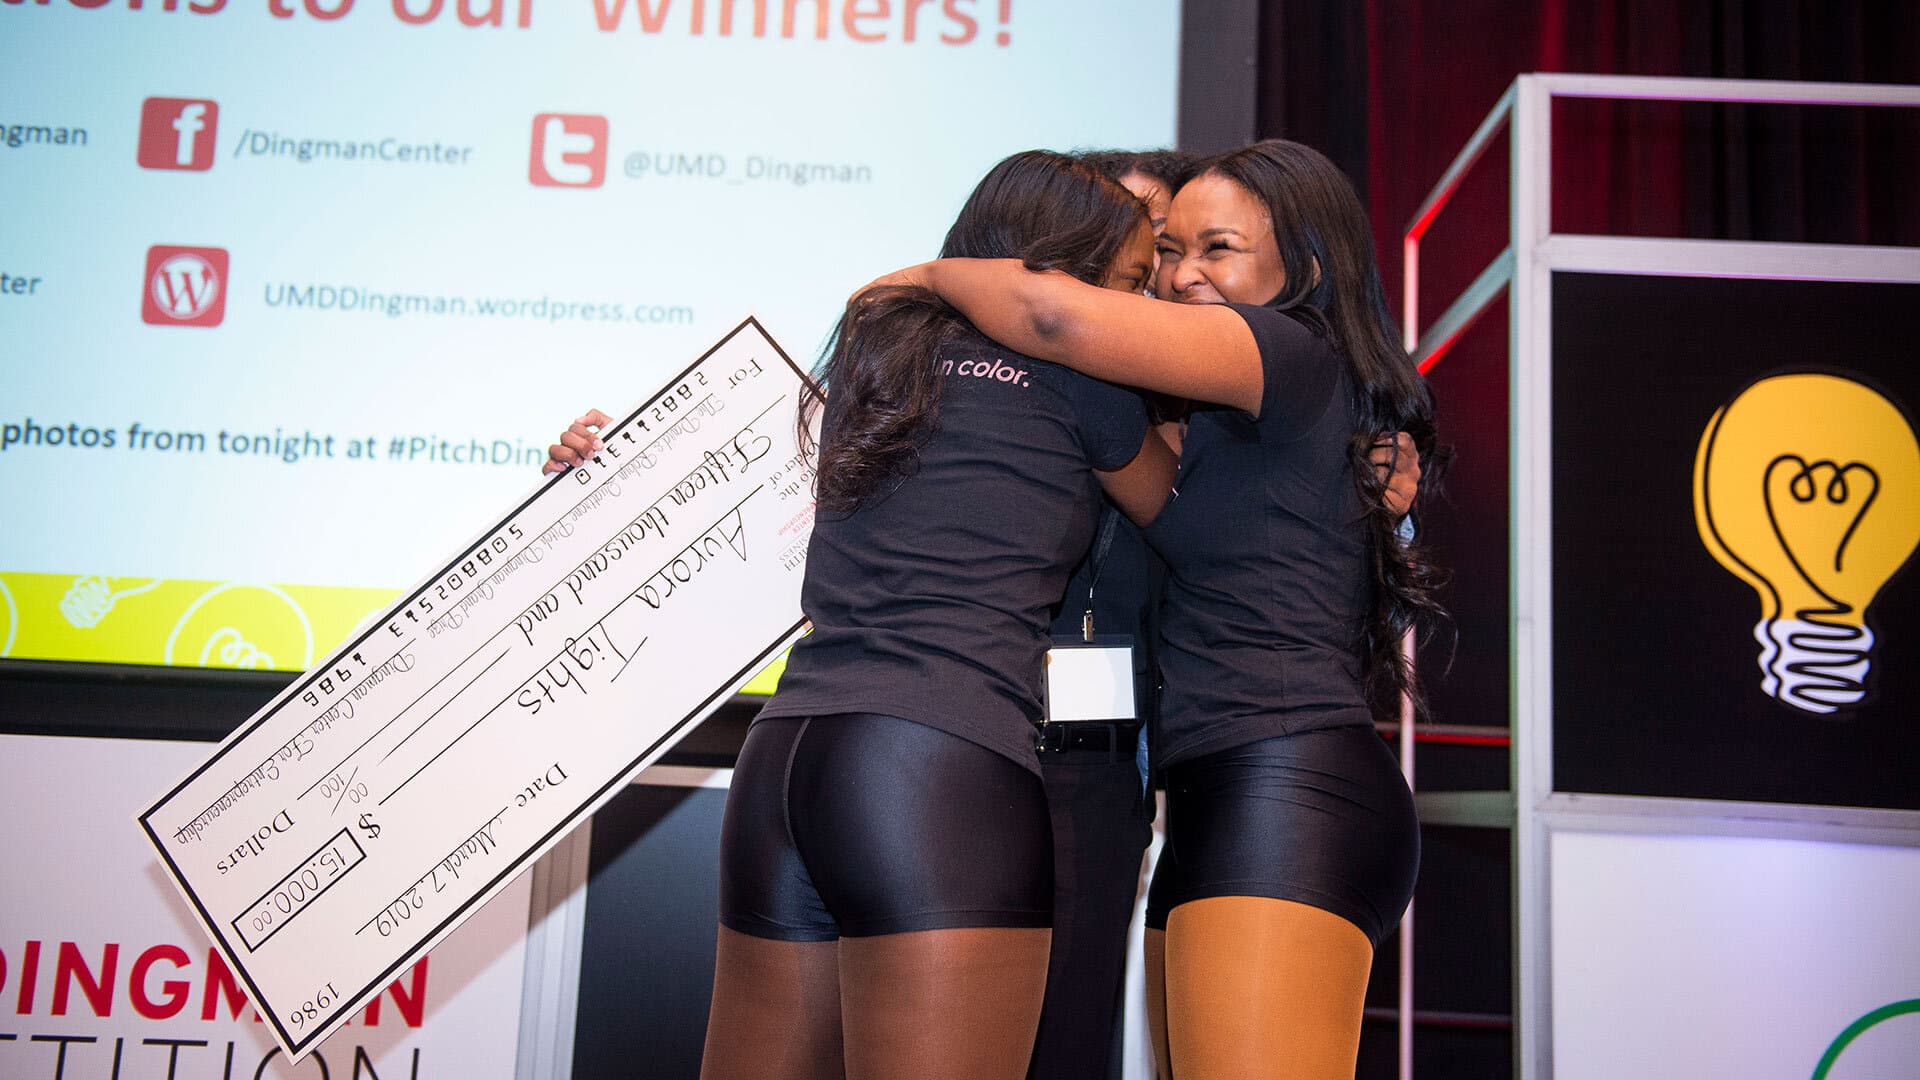 Aurora Tights wins Pitch Dingman Competition